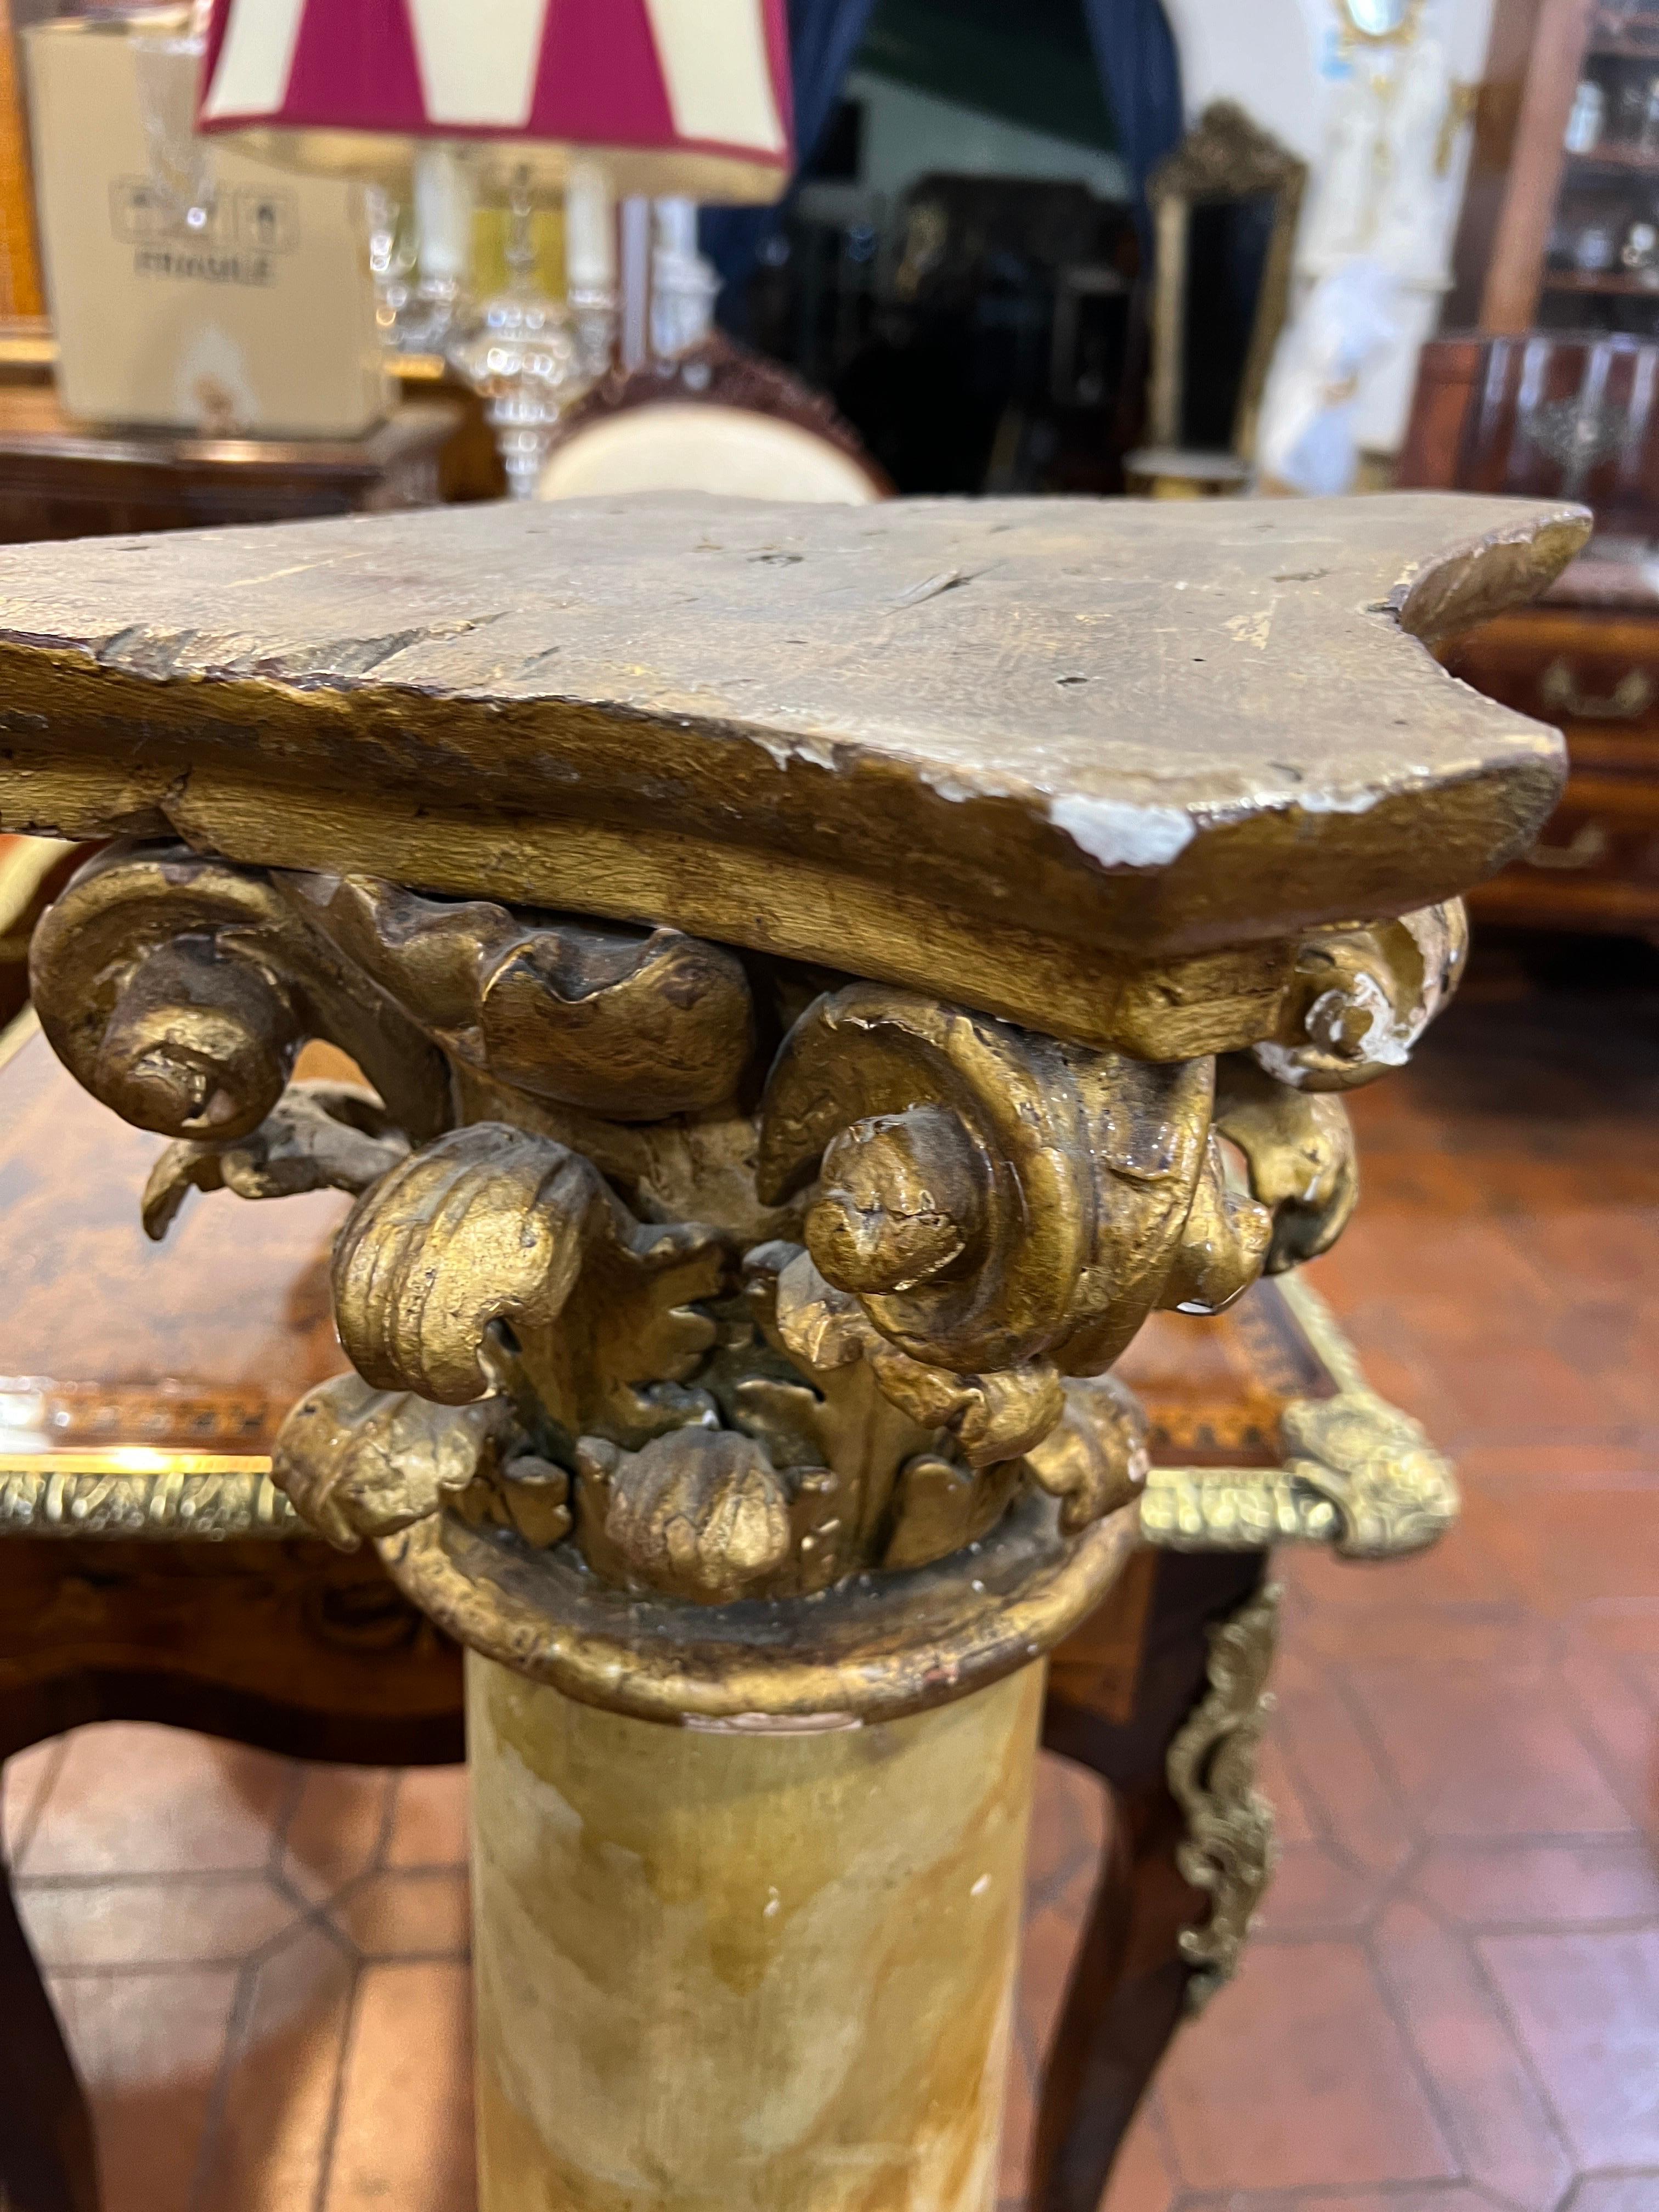 Pair of French columns , period straddling Louis XV and Louis XVI , worked in faux marble and with finely carved Corinthian capital worked in gold leaf. Excellent as vase holders or busts. Small in size easily placed in various places in the